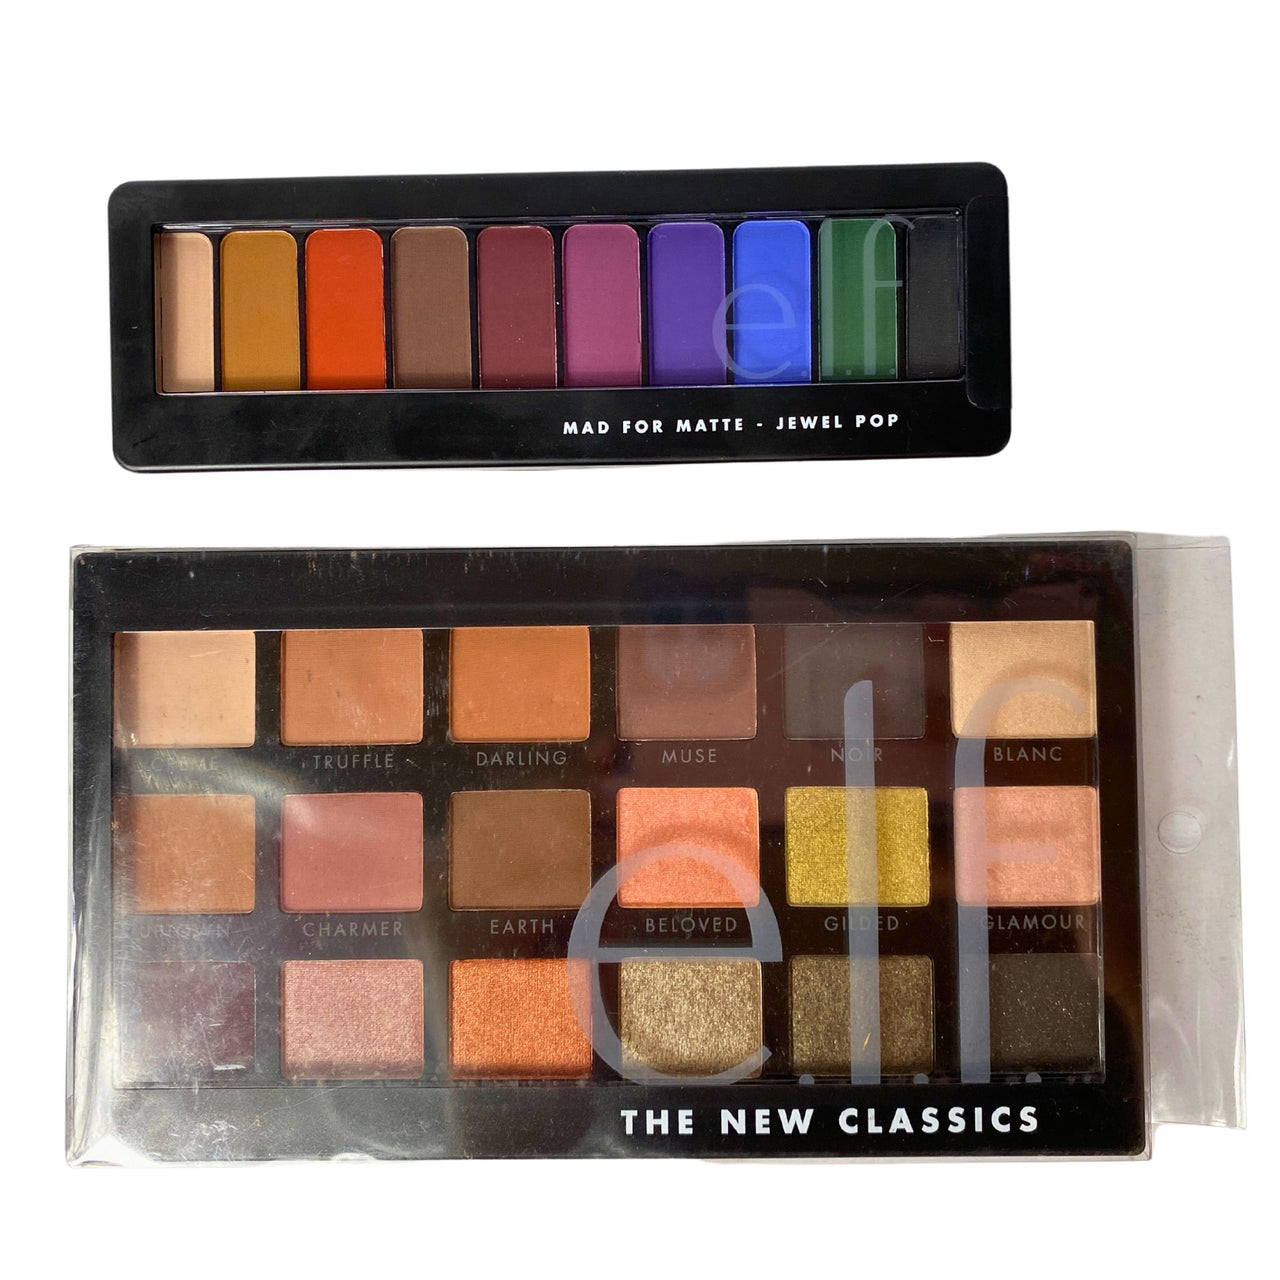 Elf Eyeshadow Palette The New Classics & Mad for Matte